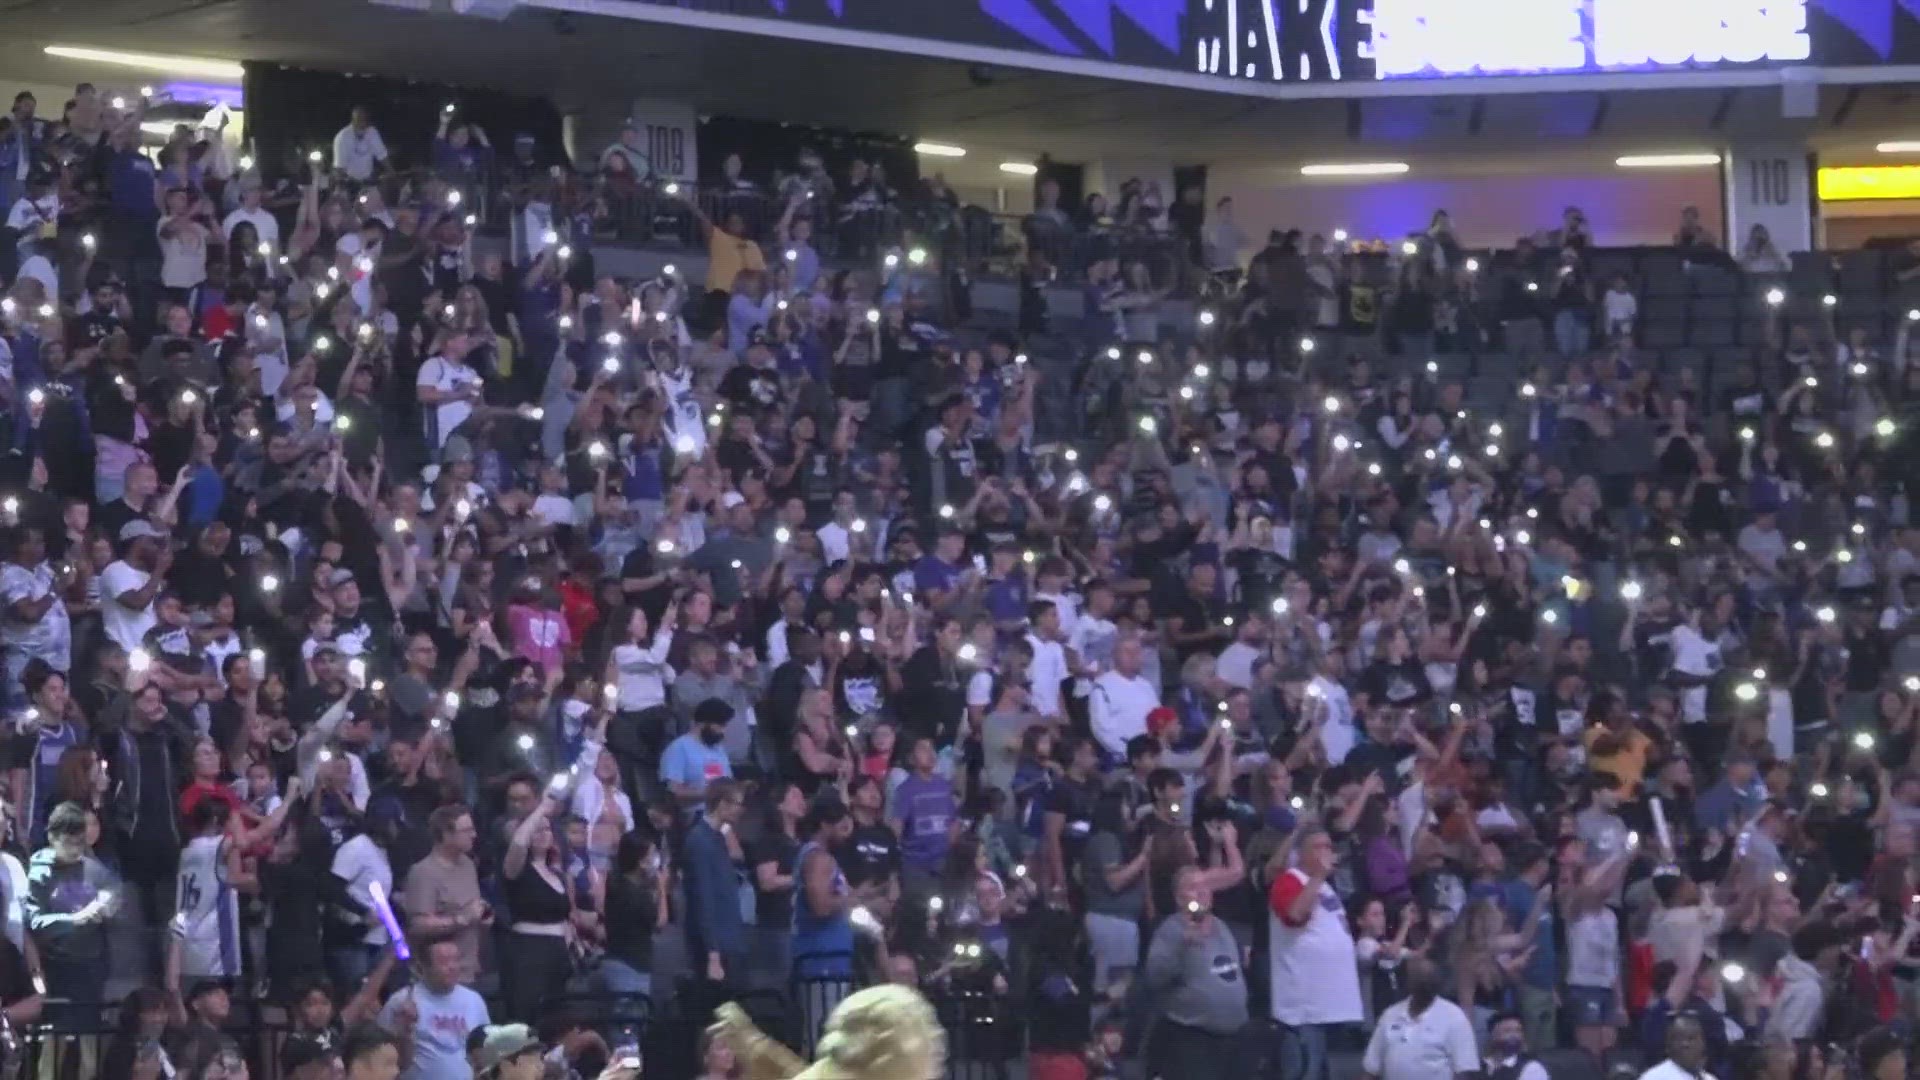 First event at Sacramento's Golden 1 Center nearly sold out